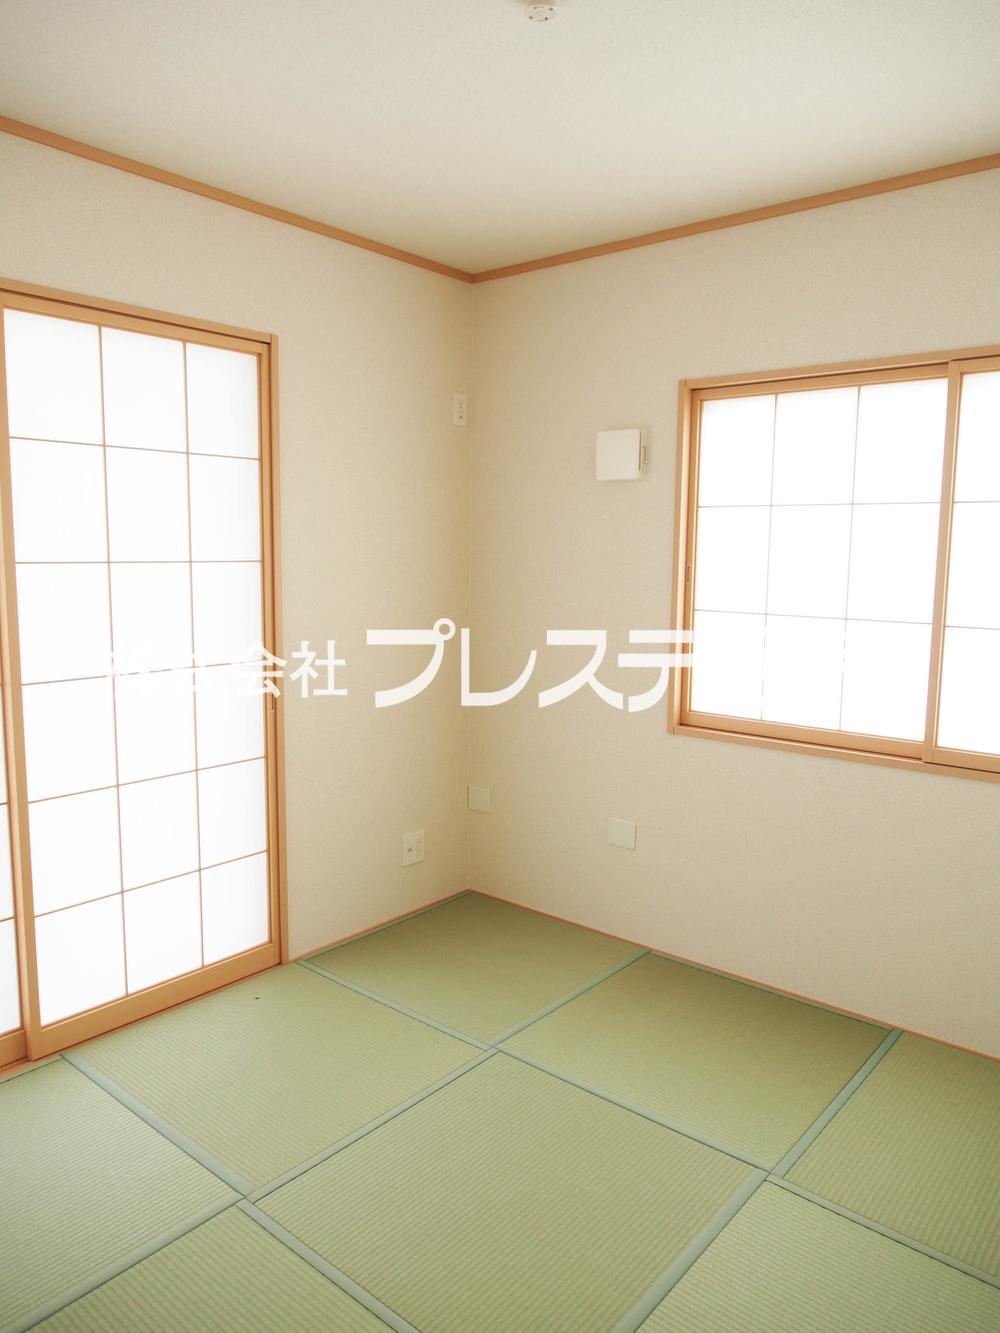 Same specifications photos (Other introspection). 2 House both, Because it is a Japanese-style room facing the south side of the spacious garden, Good per yang